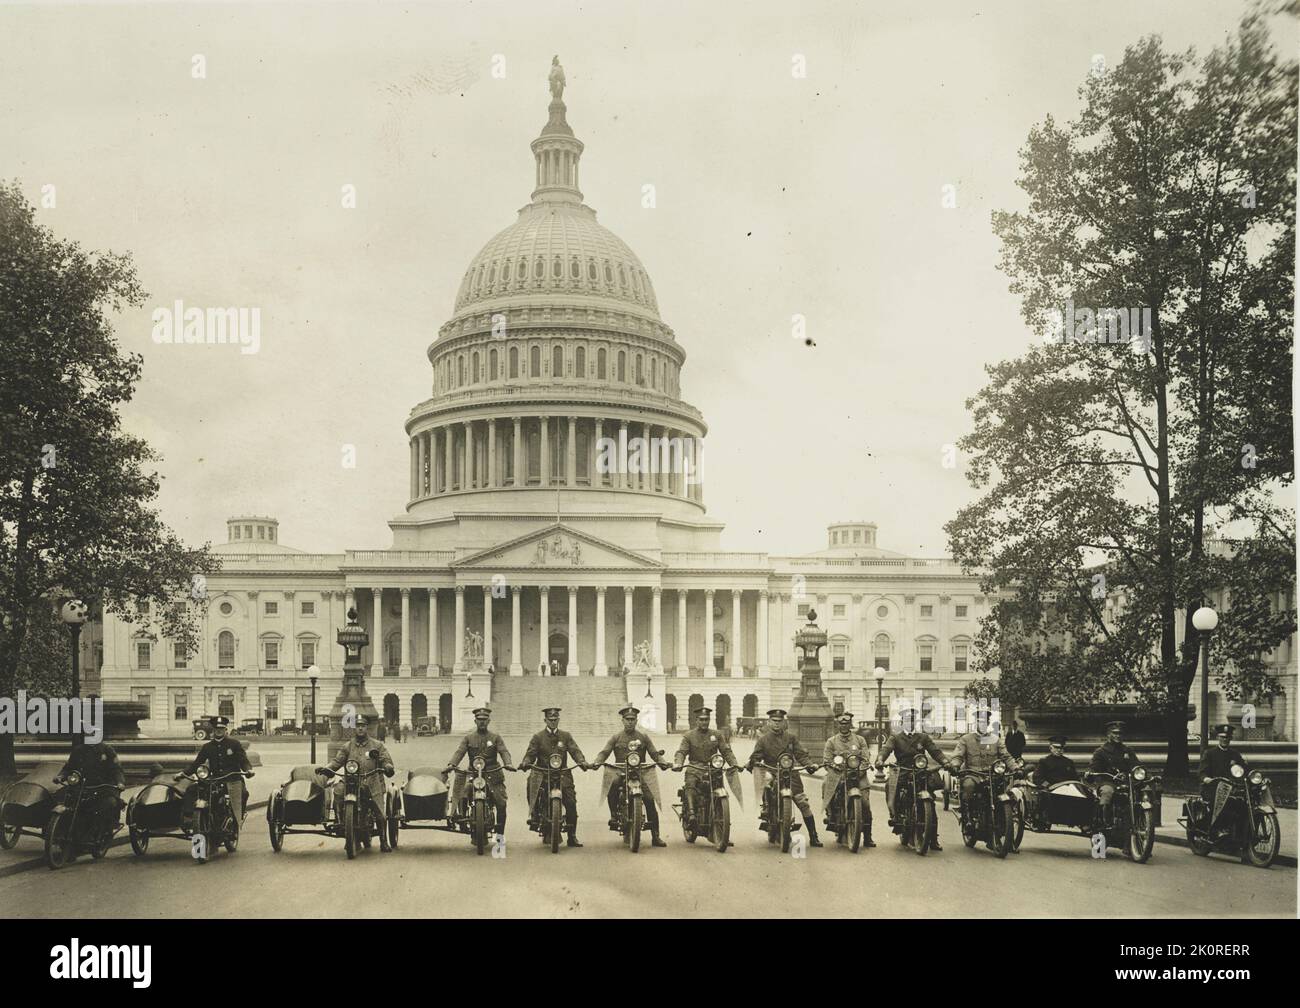 Photograph of a group of 'Washington's Finest' motorcycle policemen posed with a view of the Capitol in the background, Washington, DC, 4/26/1922. (Photo by National Photo Company) Stock Photo